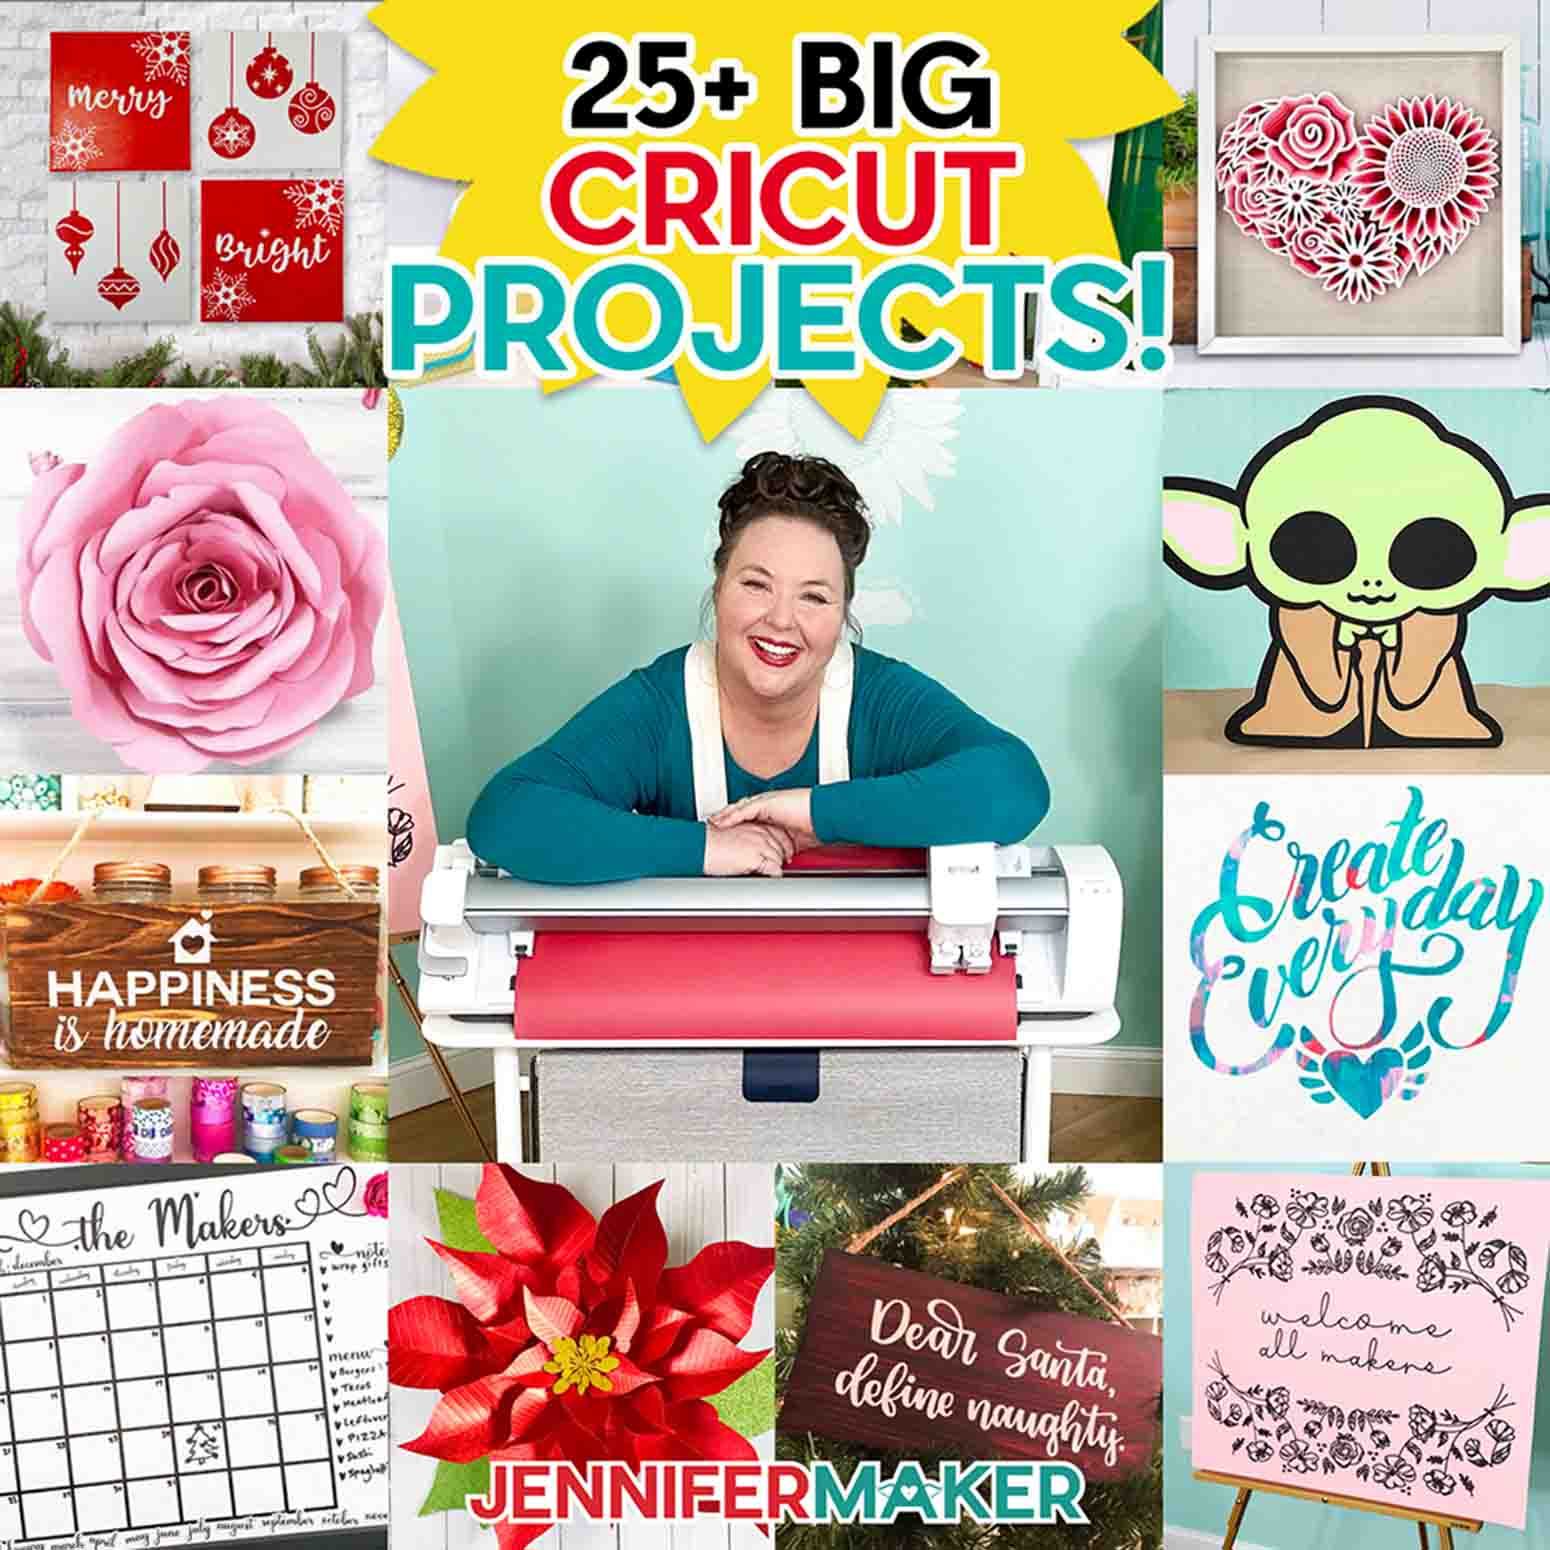 I'm sharing 25+ Big Cricut Project Ideas you can make with the new Cricut Venture! Check out my tutorial at JenniferMaker.com